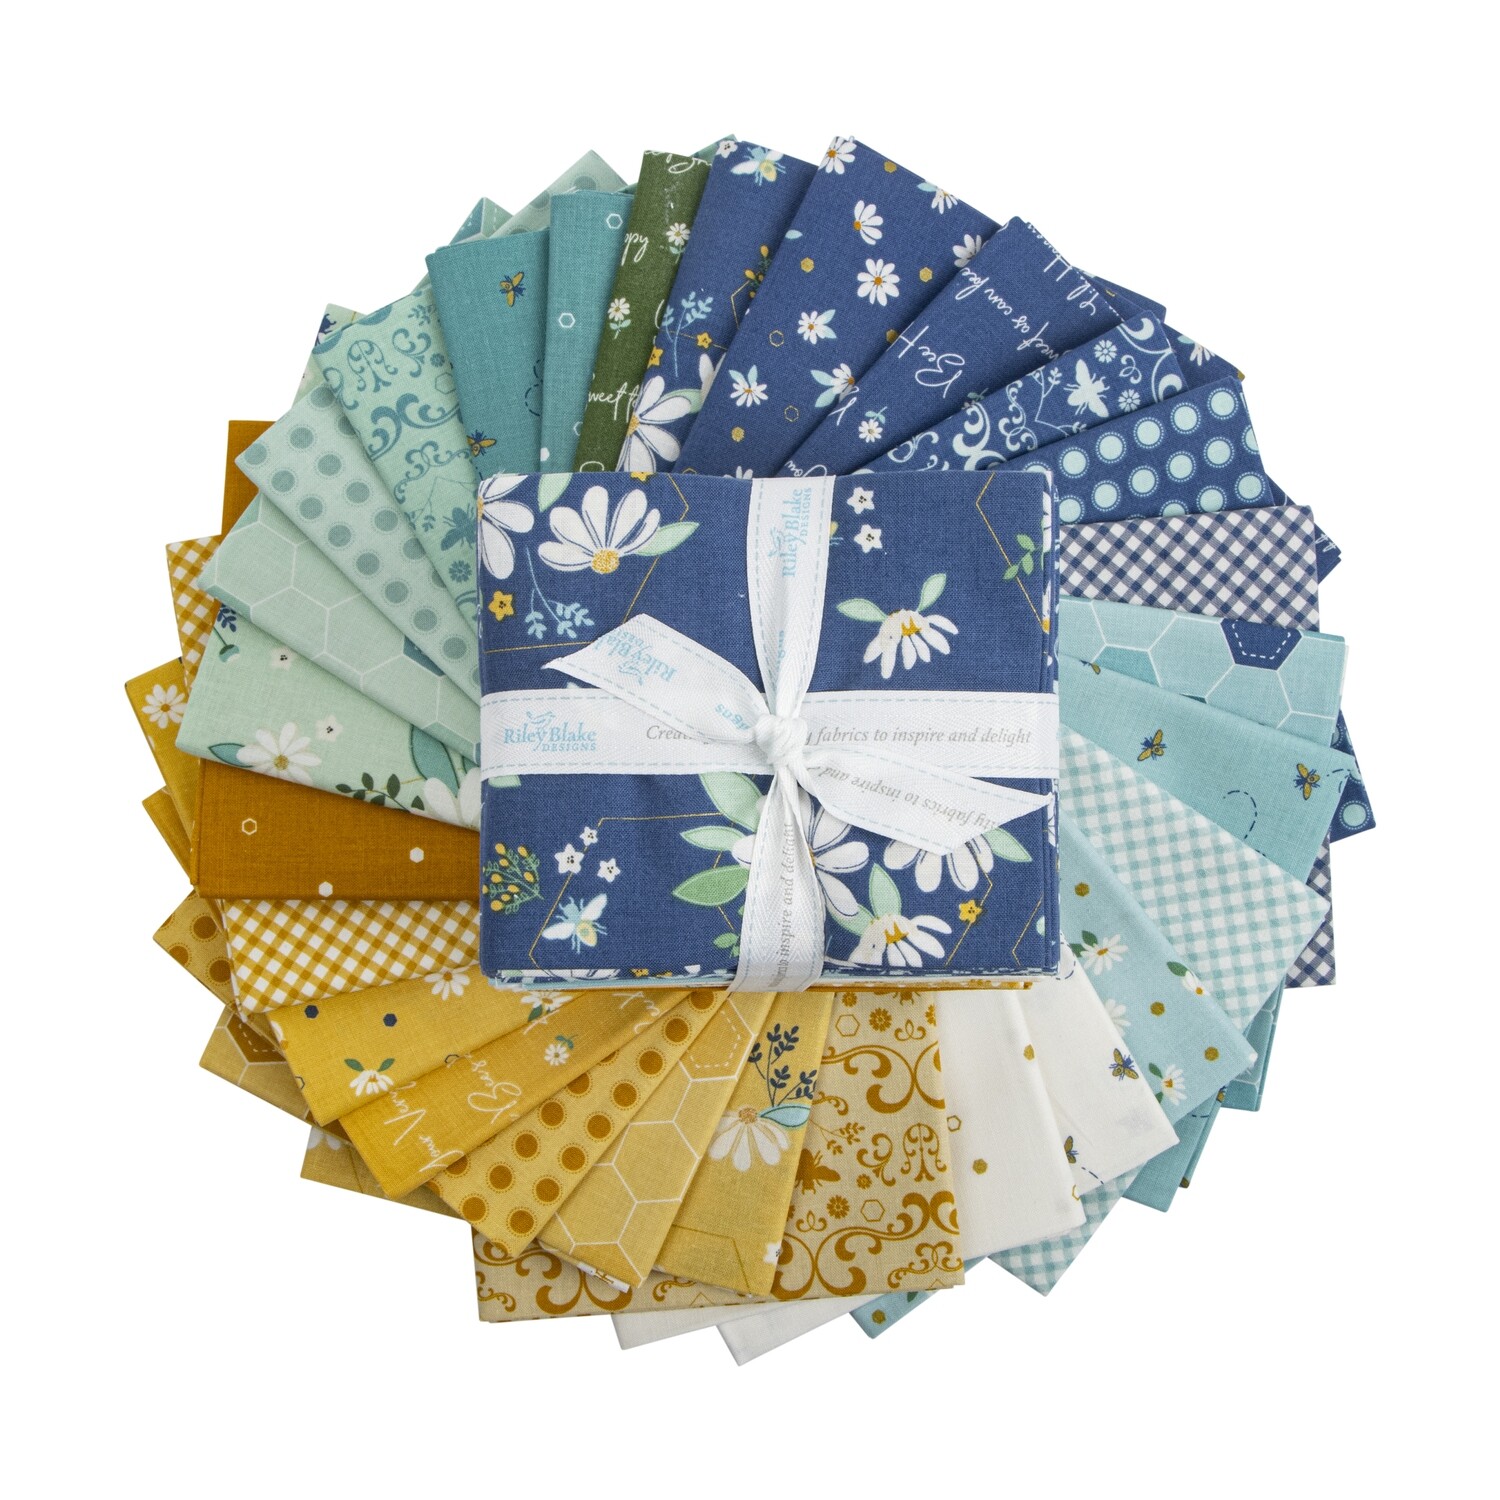 DAISY FIELDS Fat Quarter Bundle by BEVERLY MCcULLOUGH